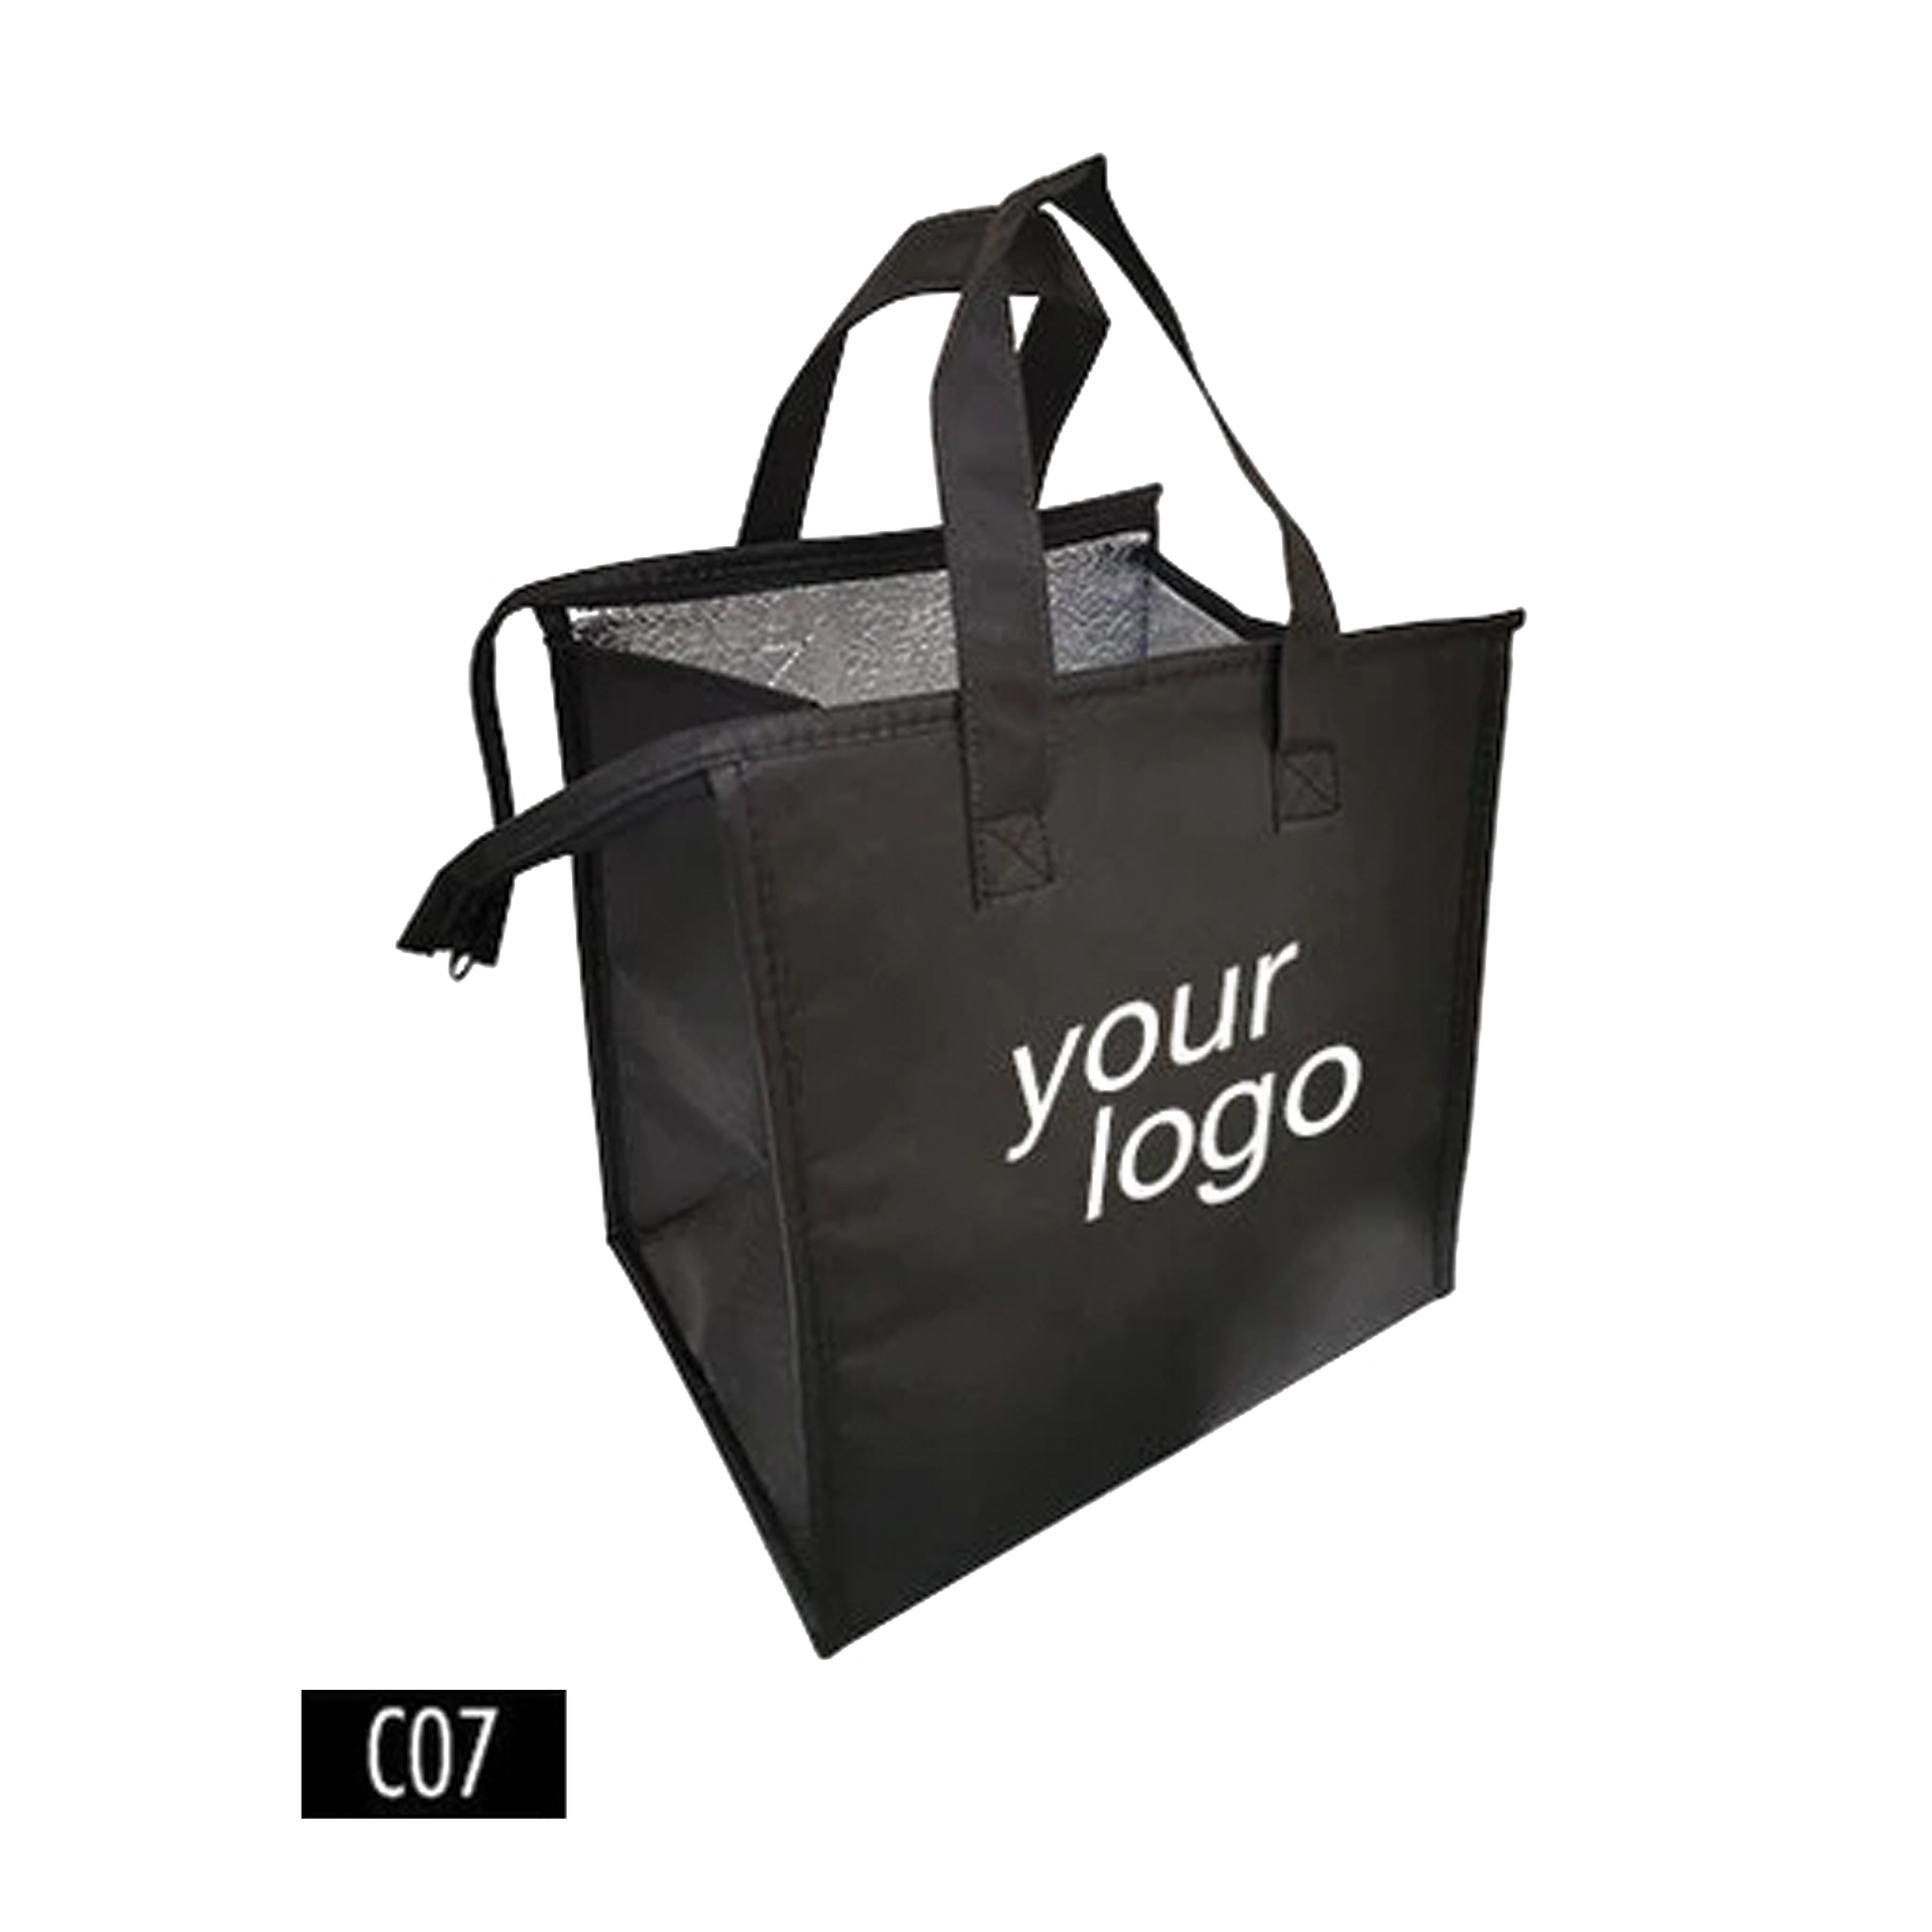 A black insulated lunch bag with zipper and your logo prominently displayed on it